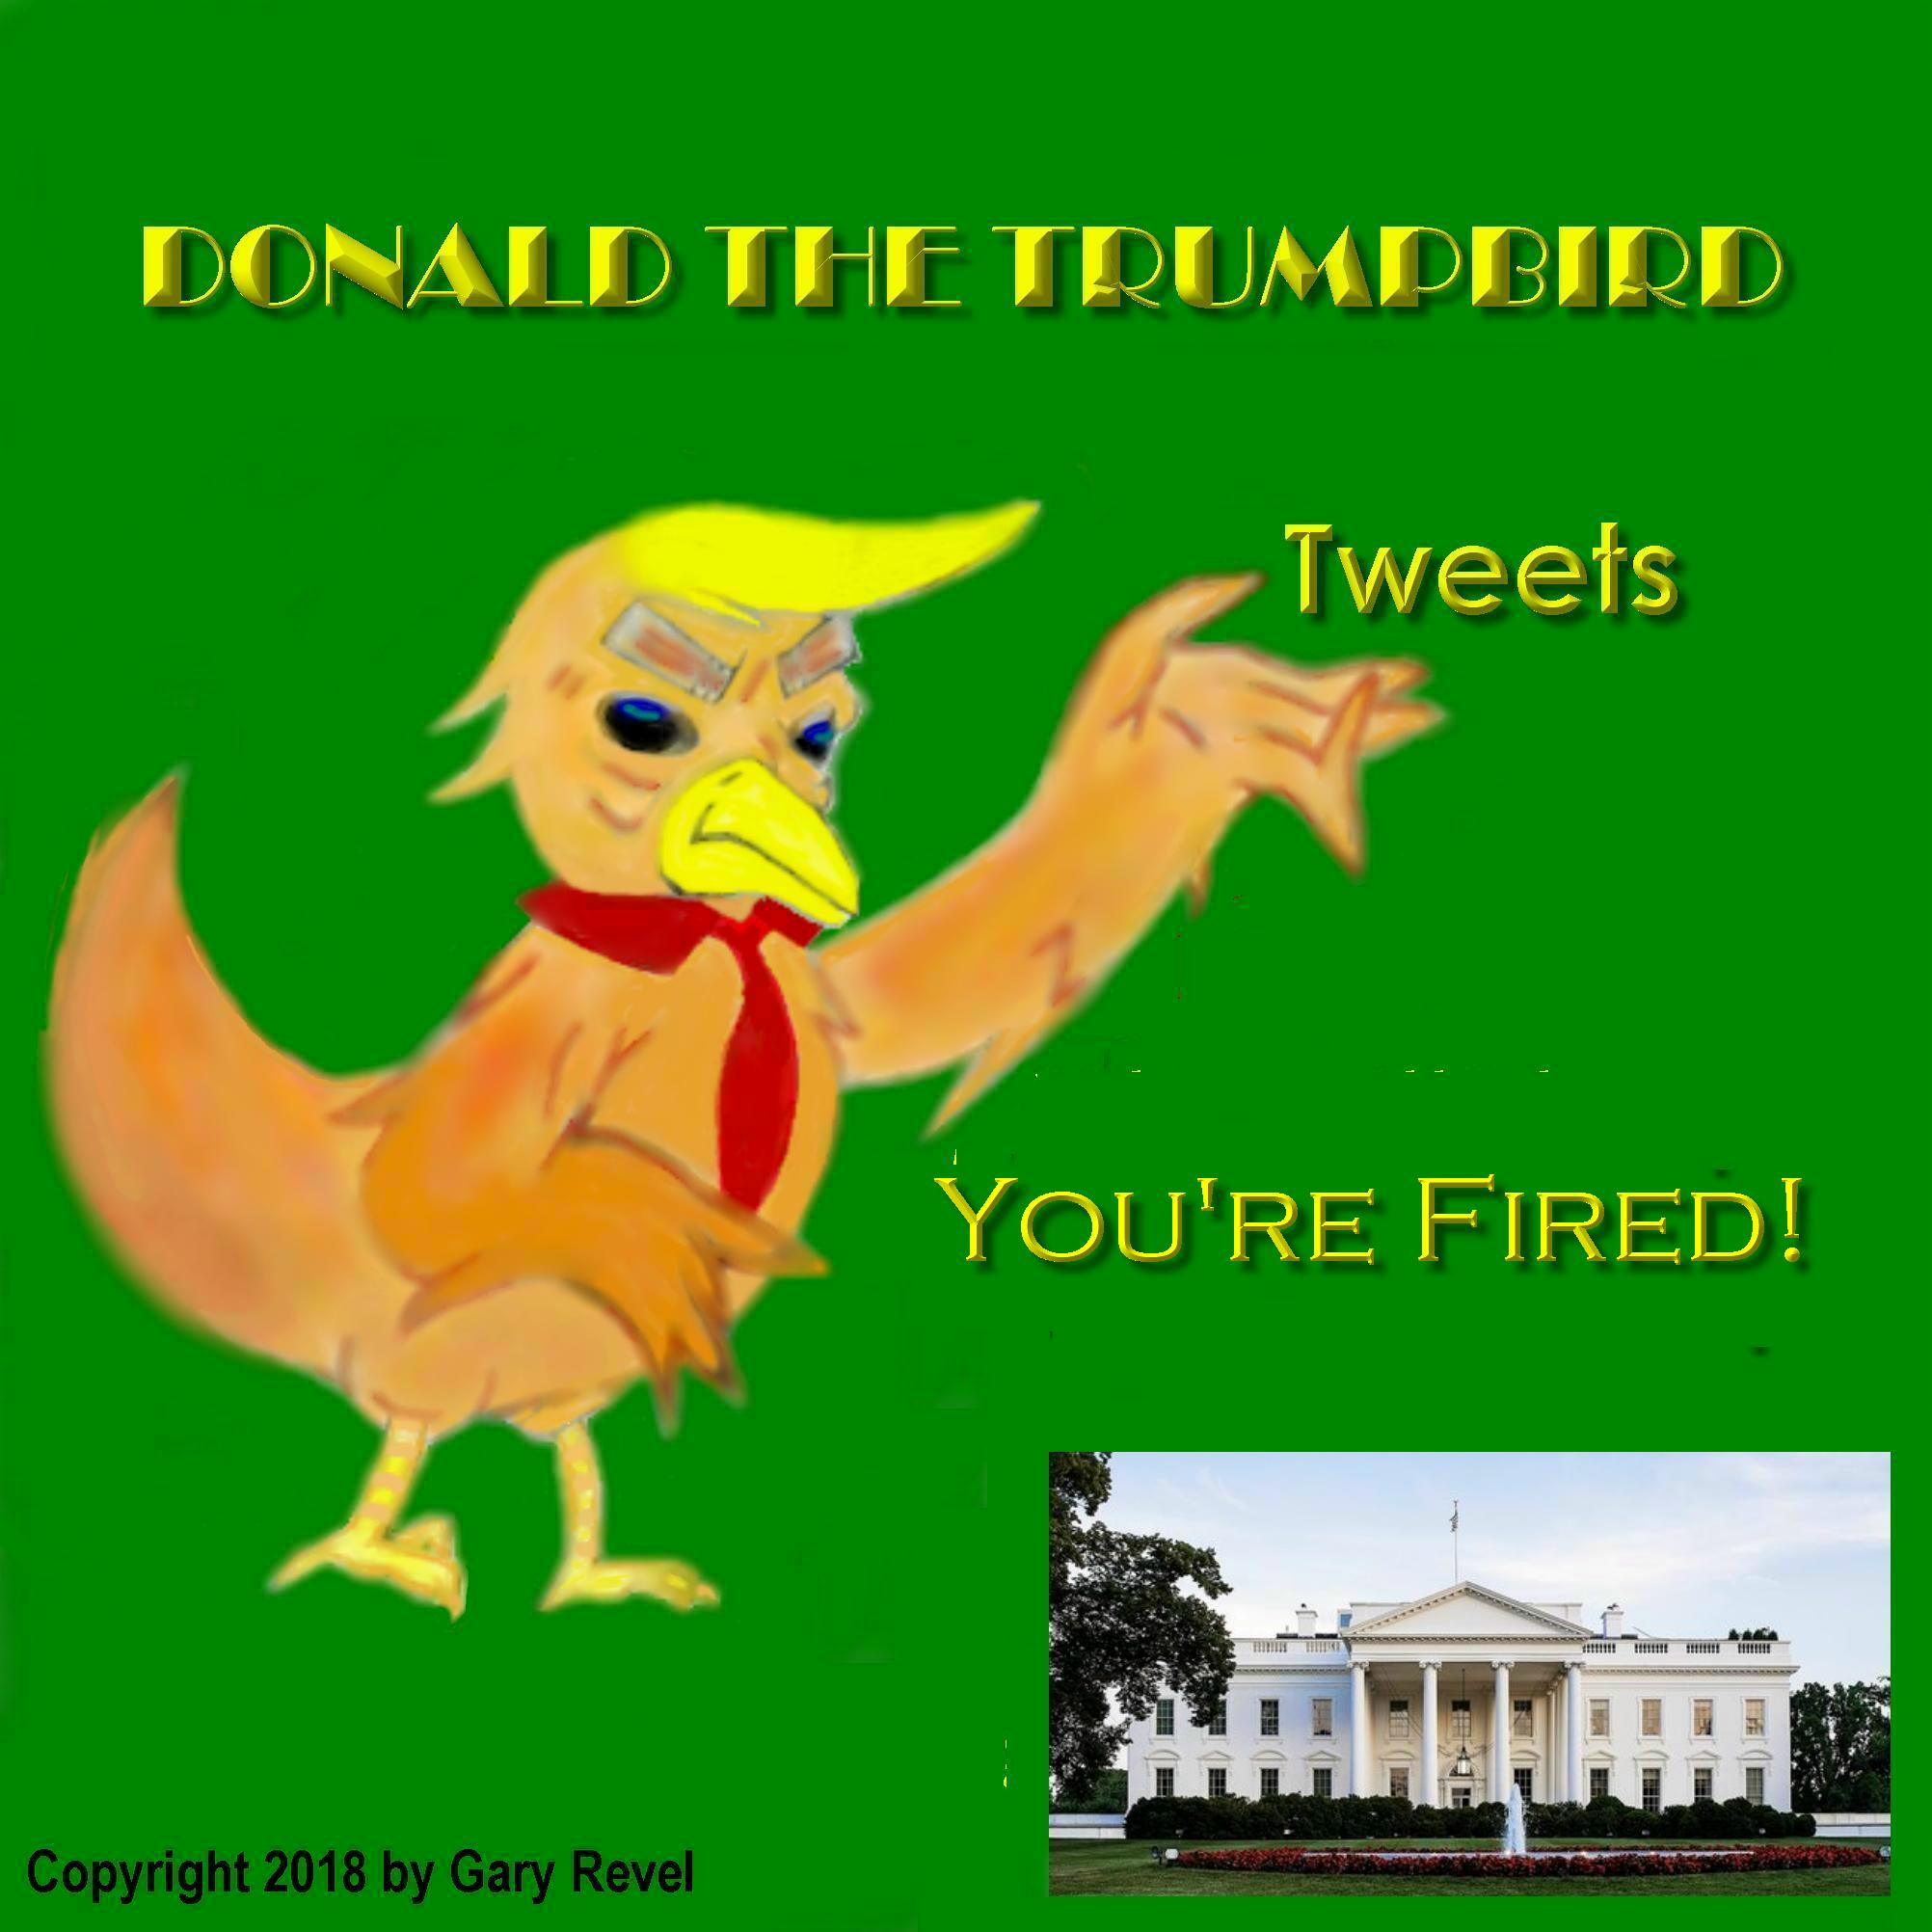 Donald the Trumpbird tweets you're fired